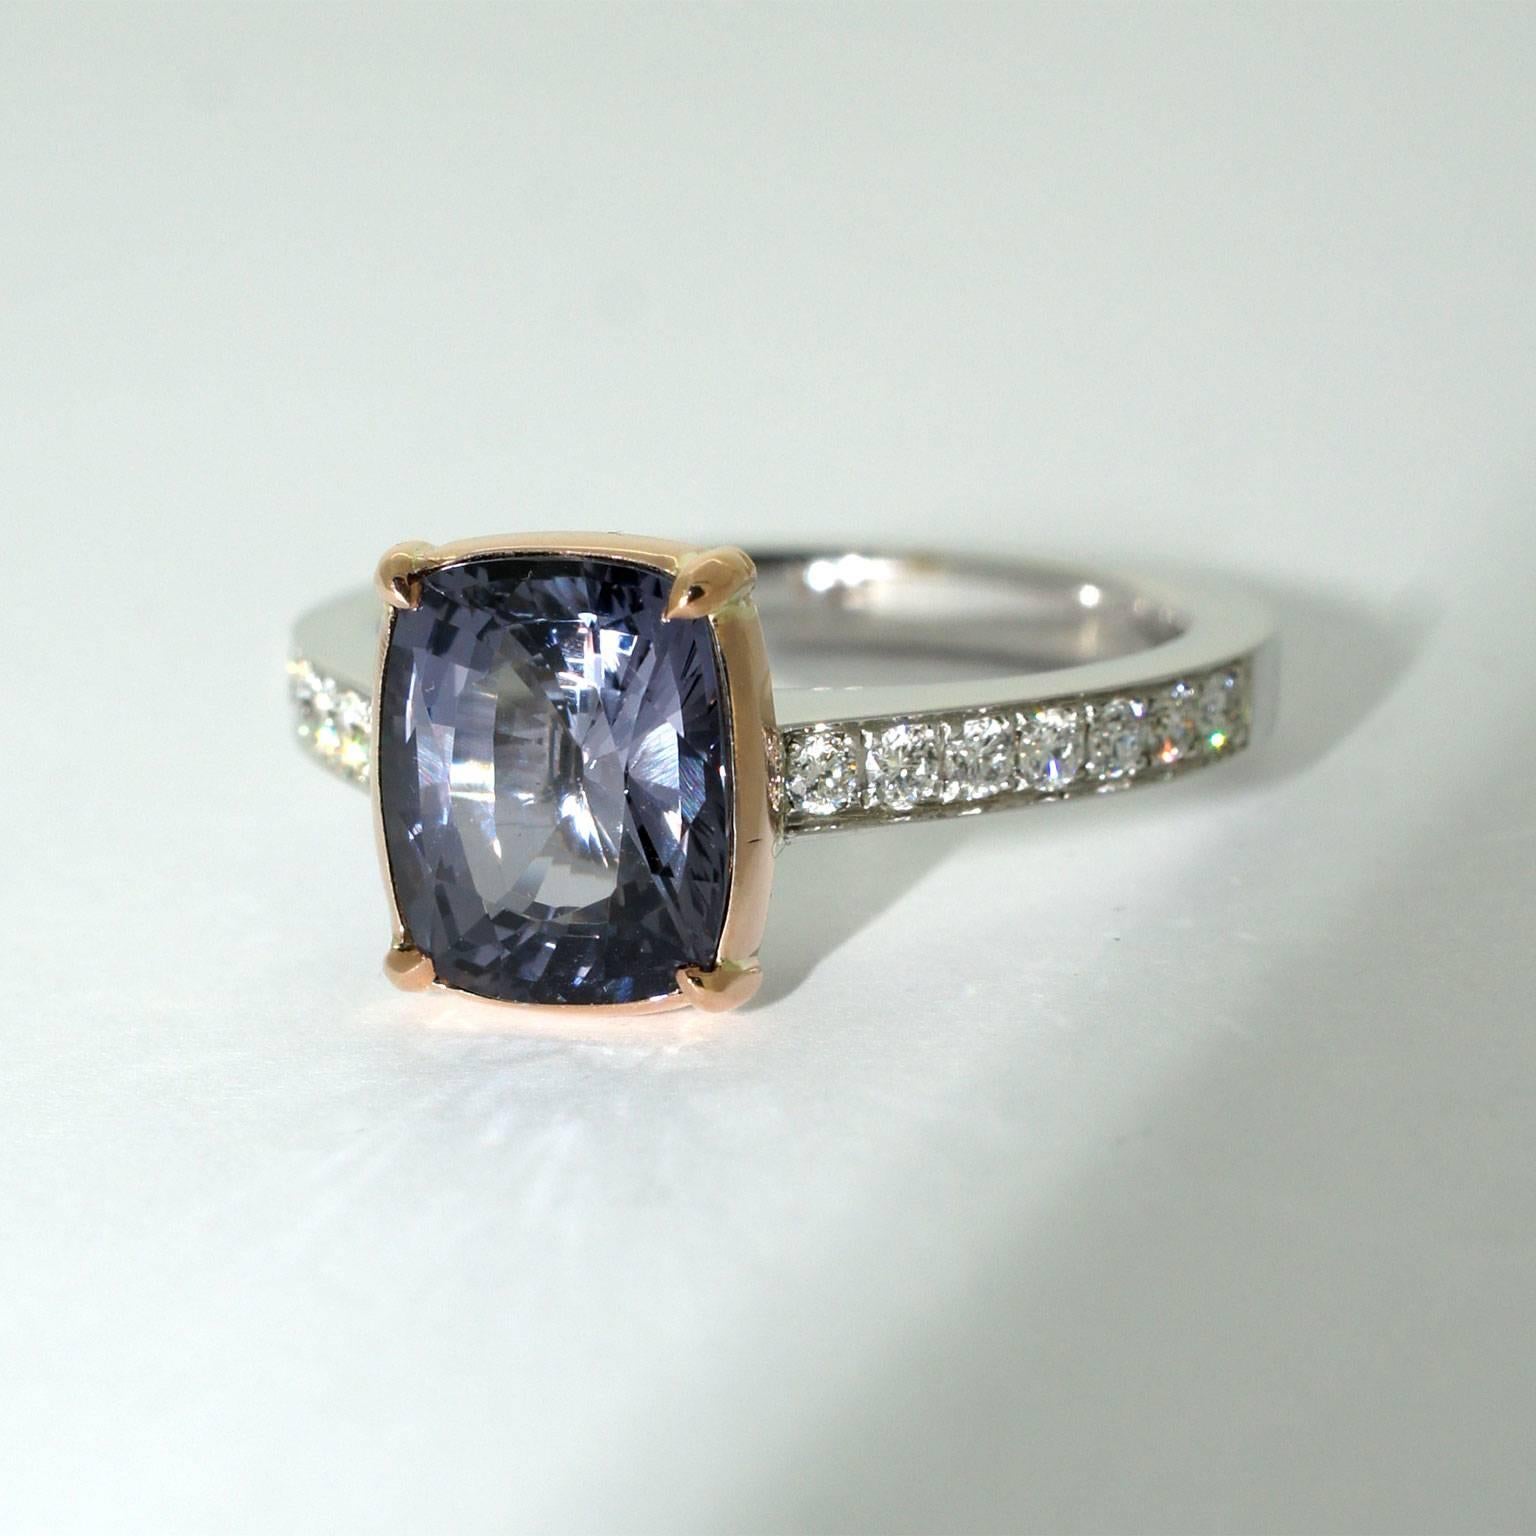 This elegant ring, inspired by the art of the Renaissance Florence, is handmade in our Sydney studios. A breathtaking 2.41 carat cushion cut grey spinel in an 18k rose gold setting, is flanked by top quality diamonds in a pave setting of the 18